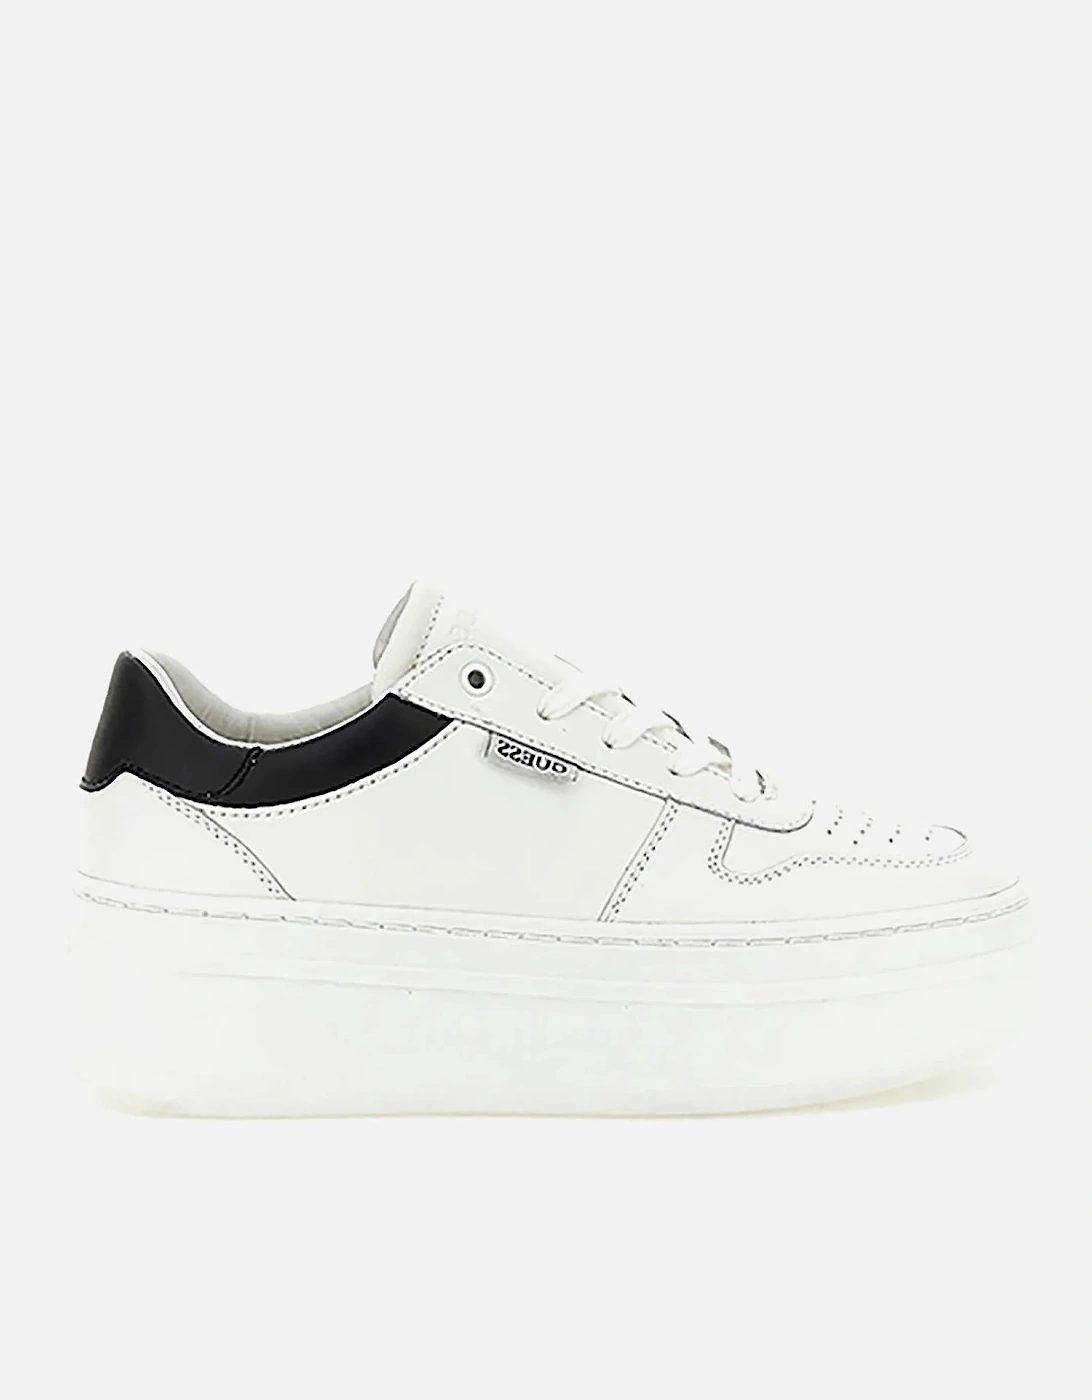 Lifet Chunky Flatform Leather Trainers - - Home - Women's Shoes - Women's Trainers - Lifet Chunky Flatform Leather Trainers, 2 of 1